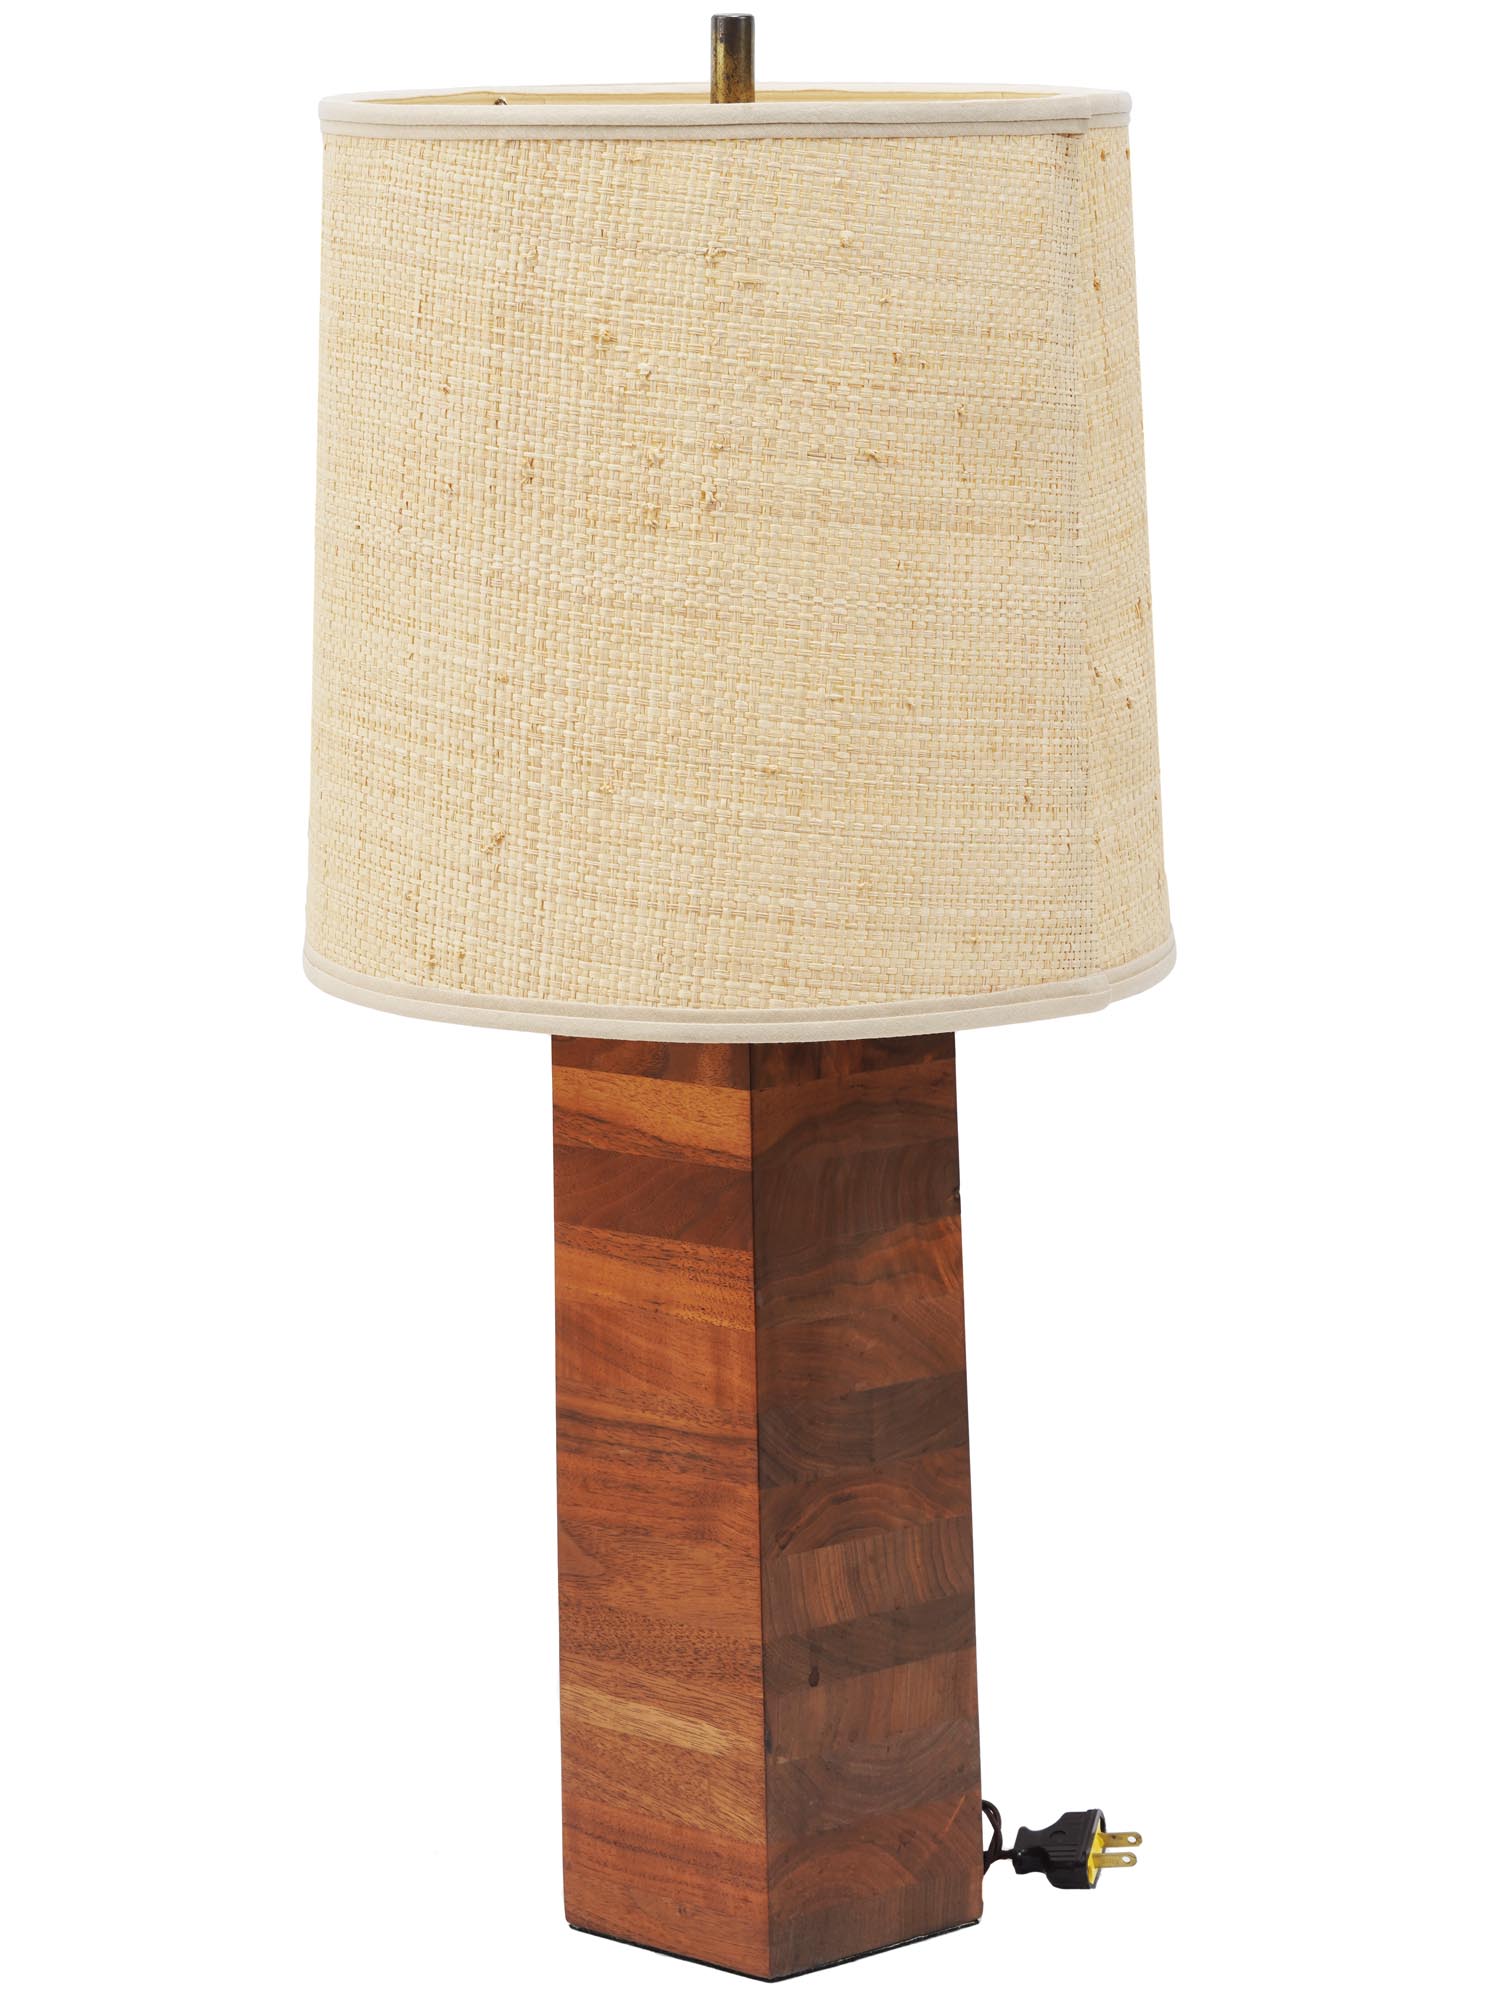 MODERN DESIGNER WOODEN TABLE LAMP WITH A SHADE PIC-0